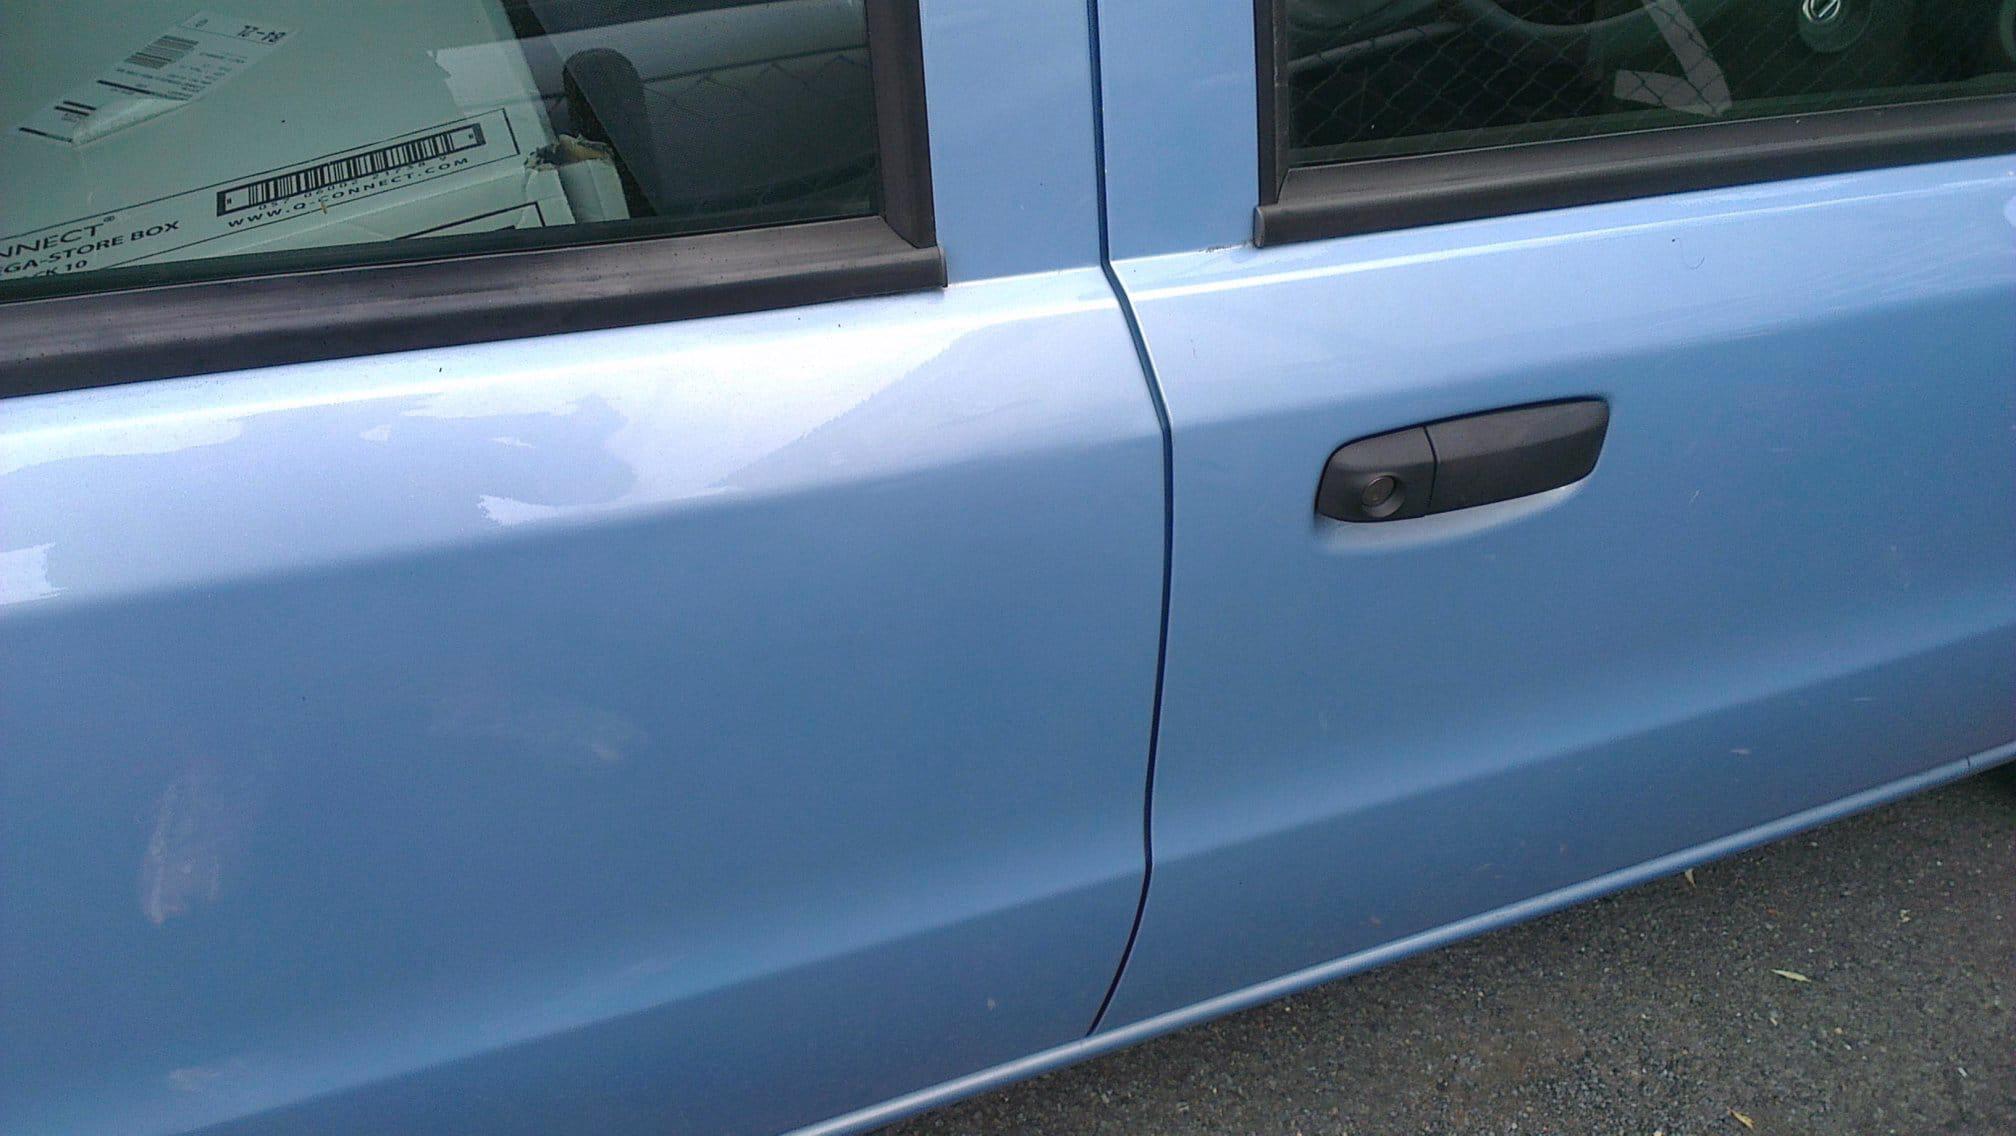 Images Panel Perfect - Paintless Dent Removal Ltd